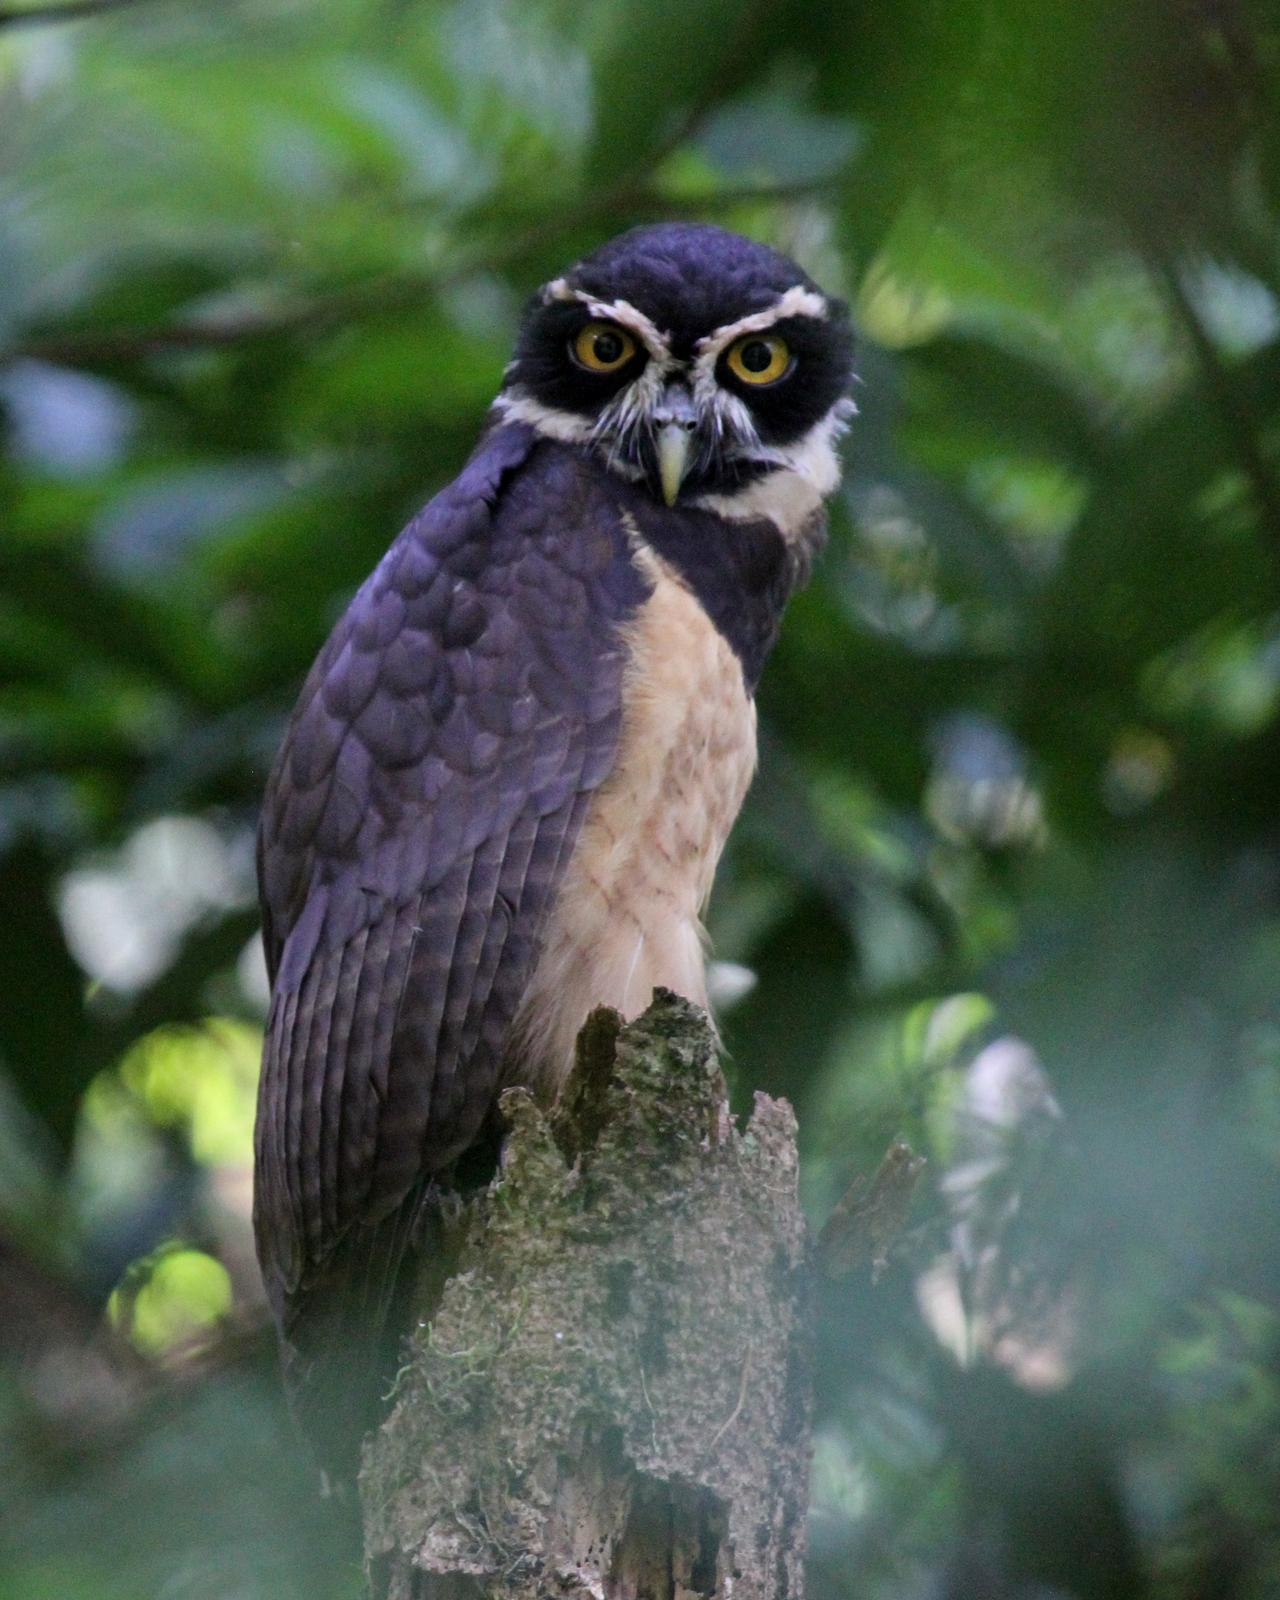 Spectacled Owl Photo by Matthew Grube